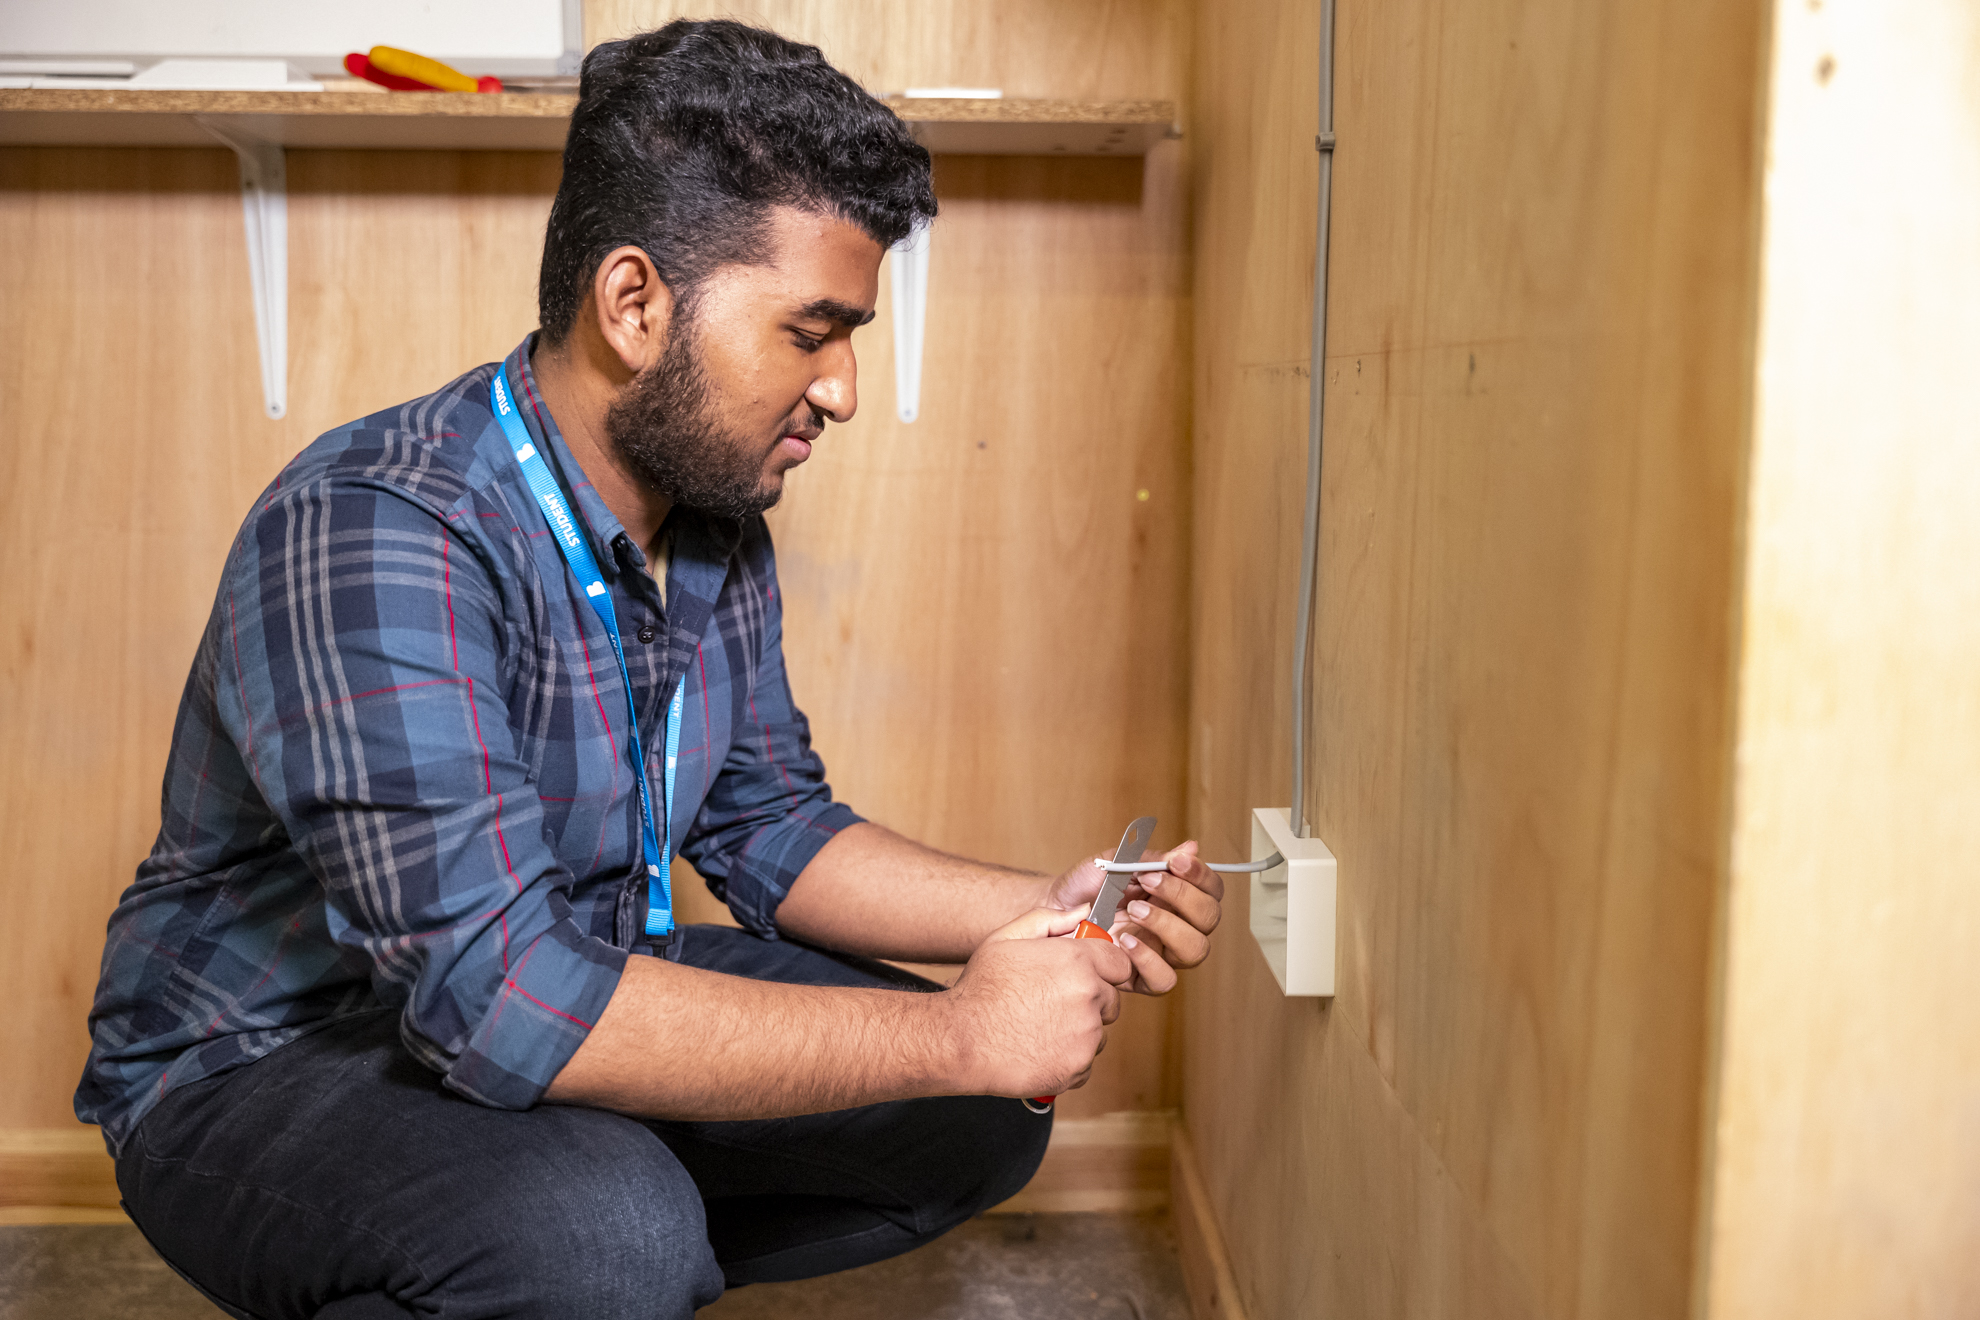 Advanced Technical Diploma in Electrical Installation (19+)